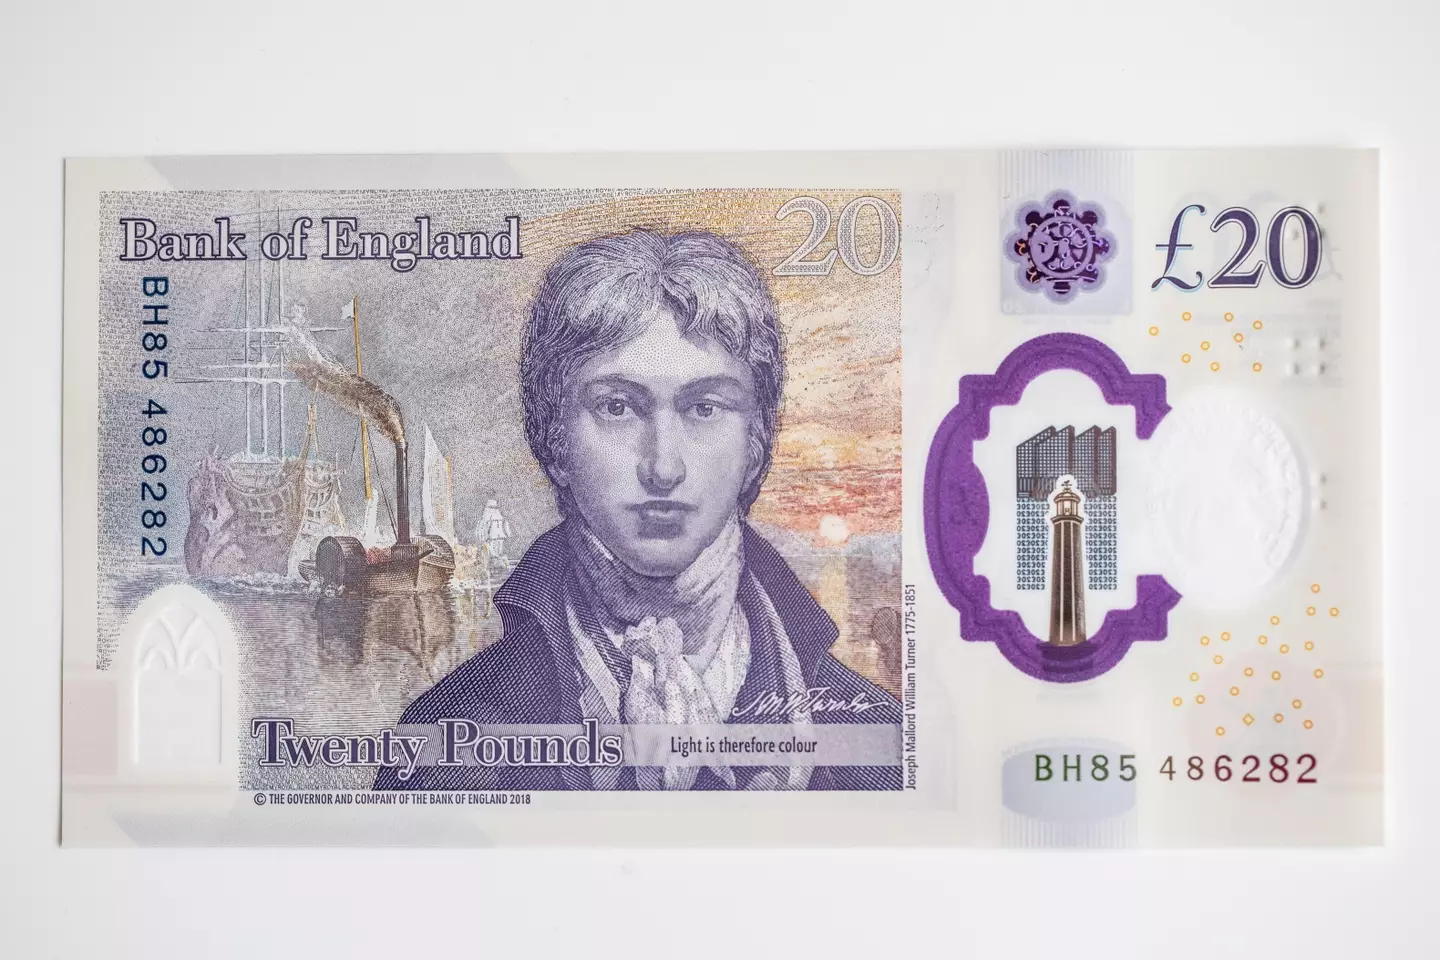 The polymer £20 notes are much harder to counterfeit. (